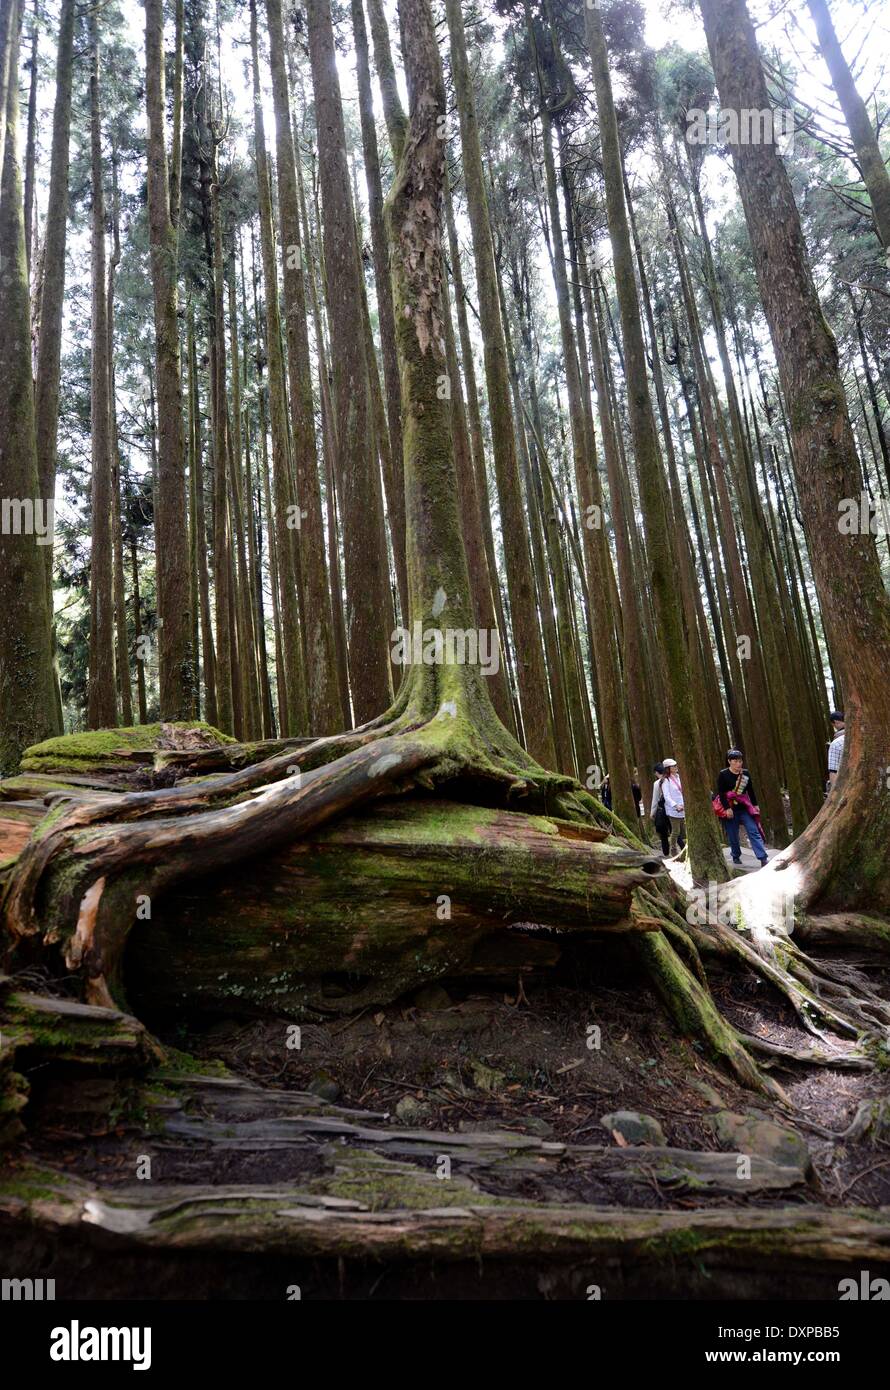 Chiayi, China's Taiwan. 28th Mar, 2014. Tourists visit a Formosan cypress forest in the Ali Mountain in Chiayi County, southeast China's Taiwan, March 28, 2014. The Ali Mountain in central Taiwan is home to an abundance of Formosan cypresses (Chamaecyparis formosensis), which are an endemic species. During Taiwan's Japanese occupation period (1895-1945), the Formosan cypresses of the Ali Mountain were shipped to Japan in substantial amounts for architectural use. Still, a considerable number of them outlived the Japanese looting and natural disasters. © Huang Xiaoyong/Xinhua/Alamy Live News Stock Photo